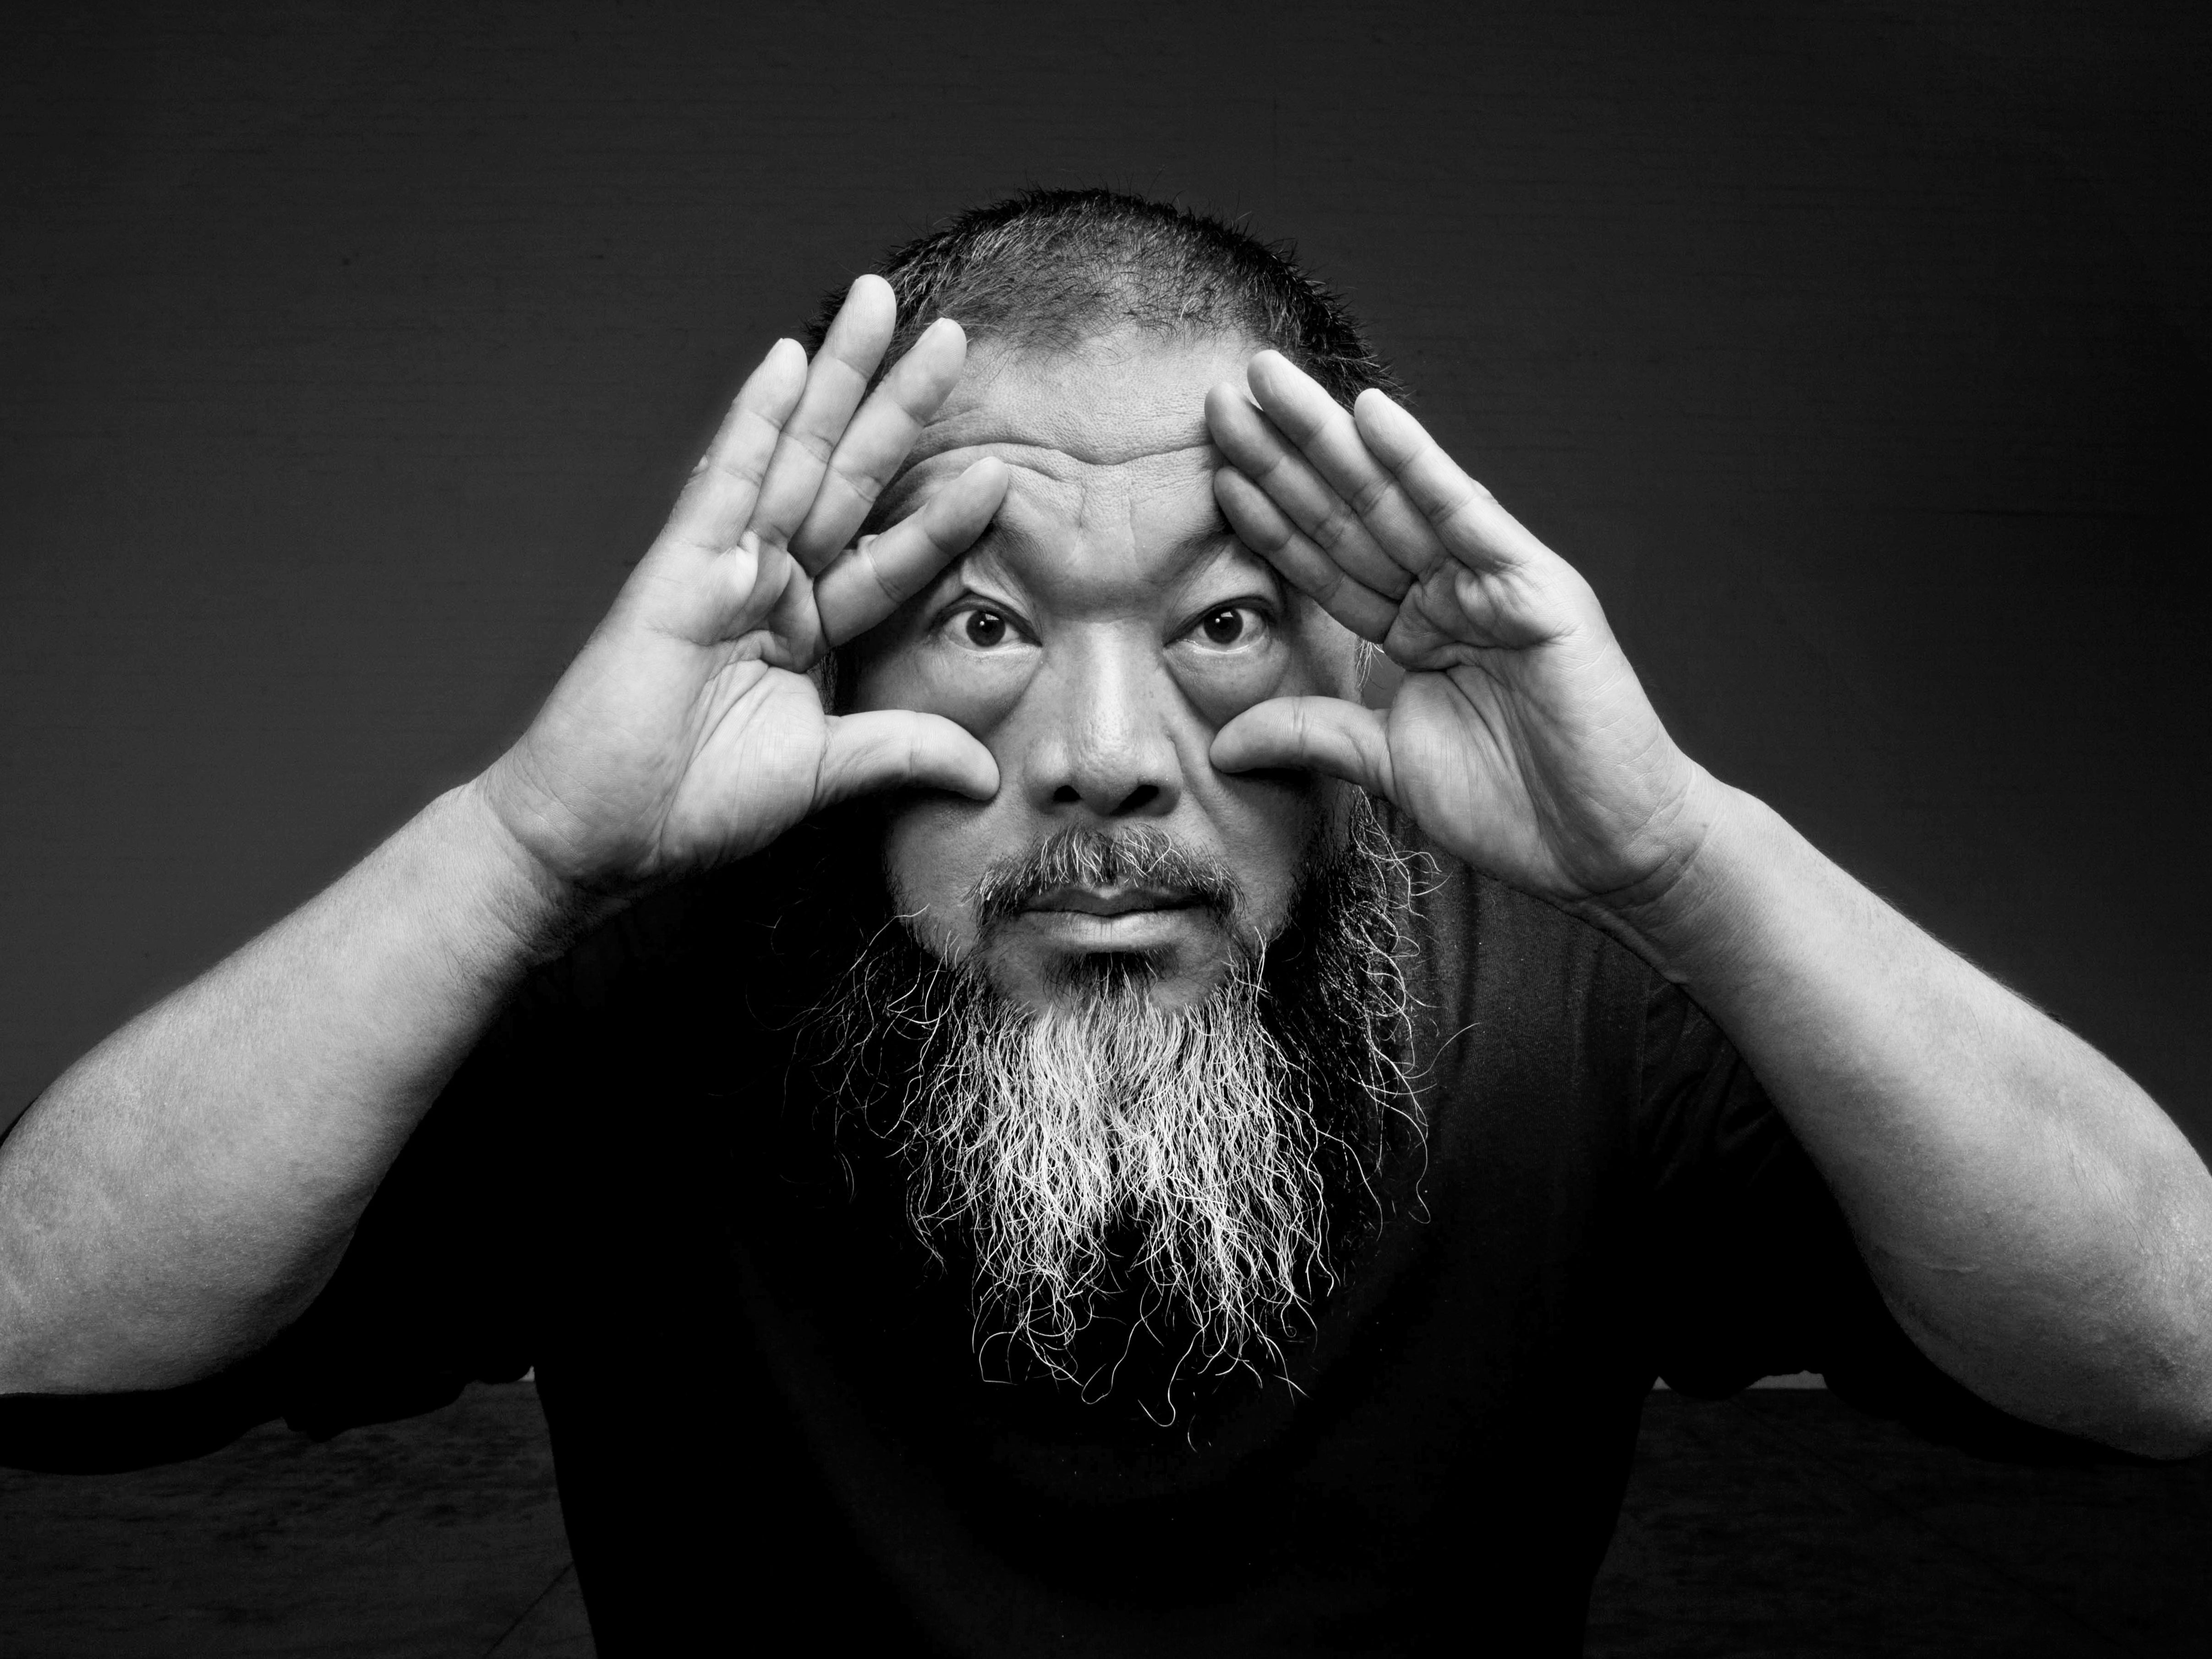 Ai Weiwei: ‘I thought social media could be a fertile ground for freedom of speech. It’s not true’